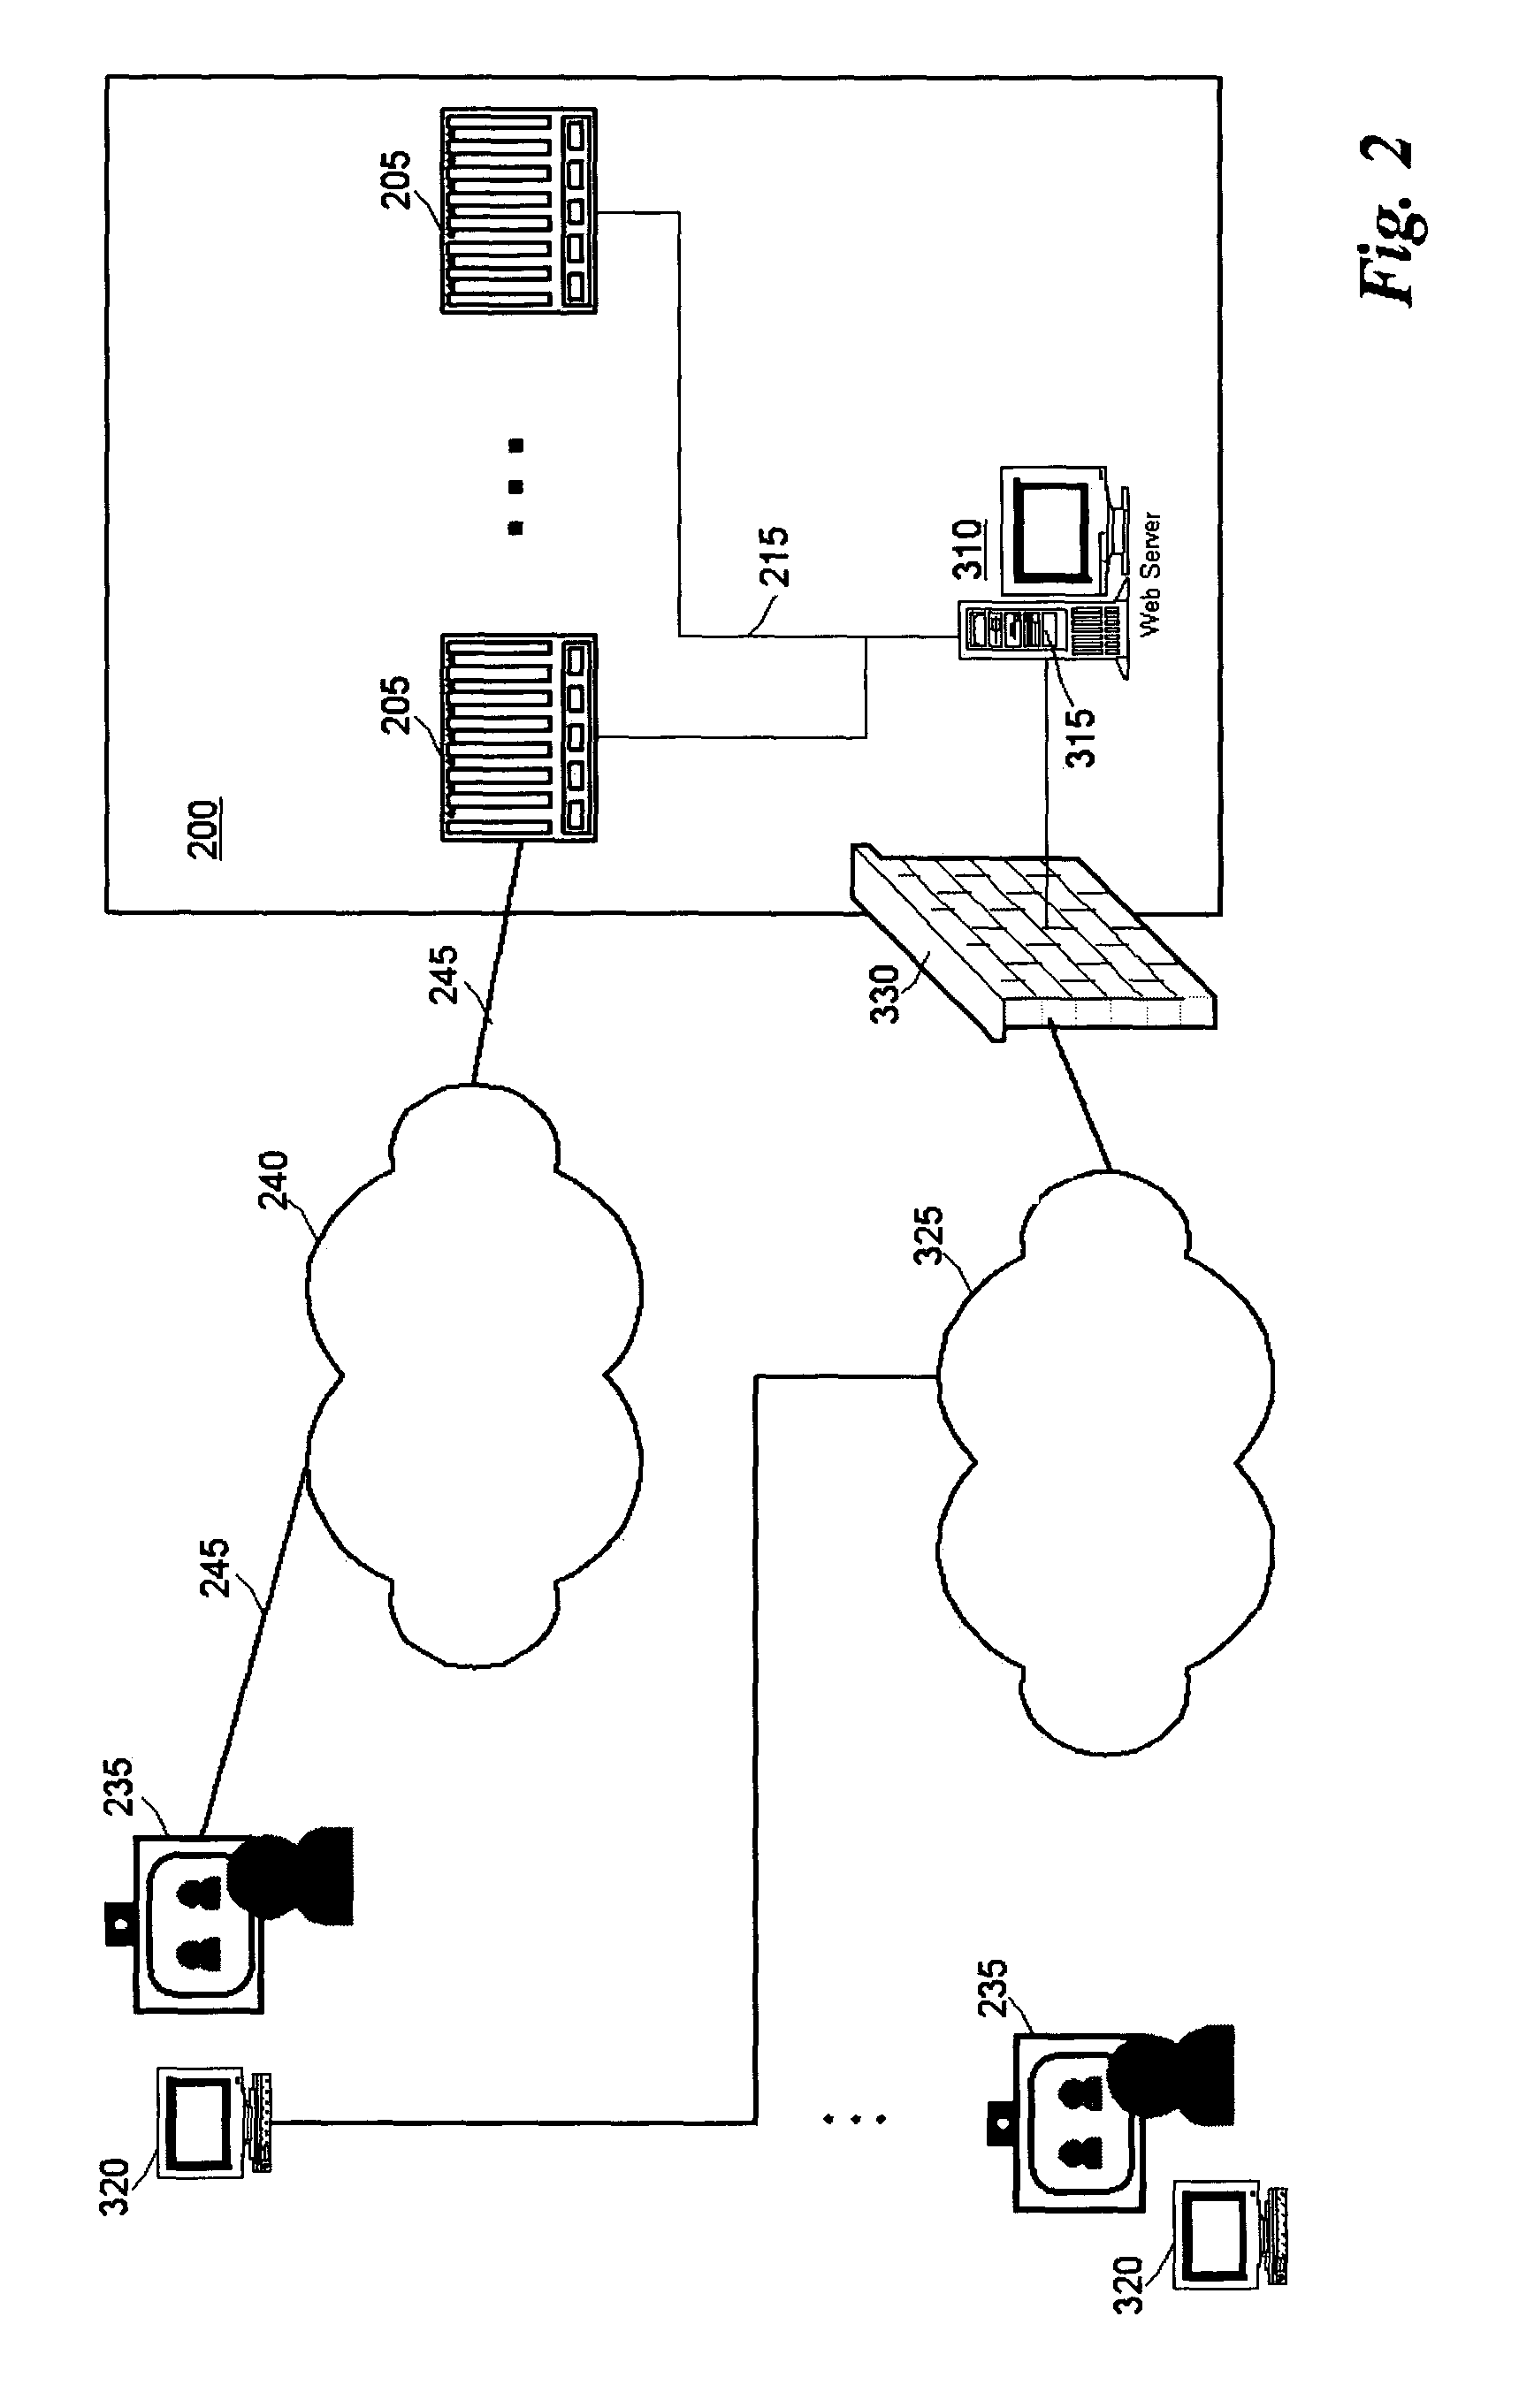 System and method of monitoring video and/or audio conferencing through a rapid-update website